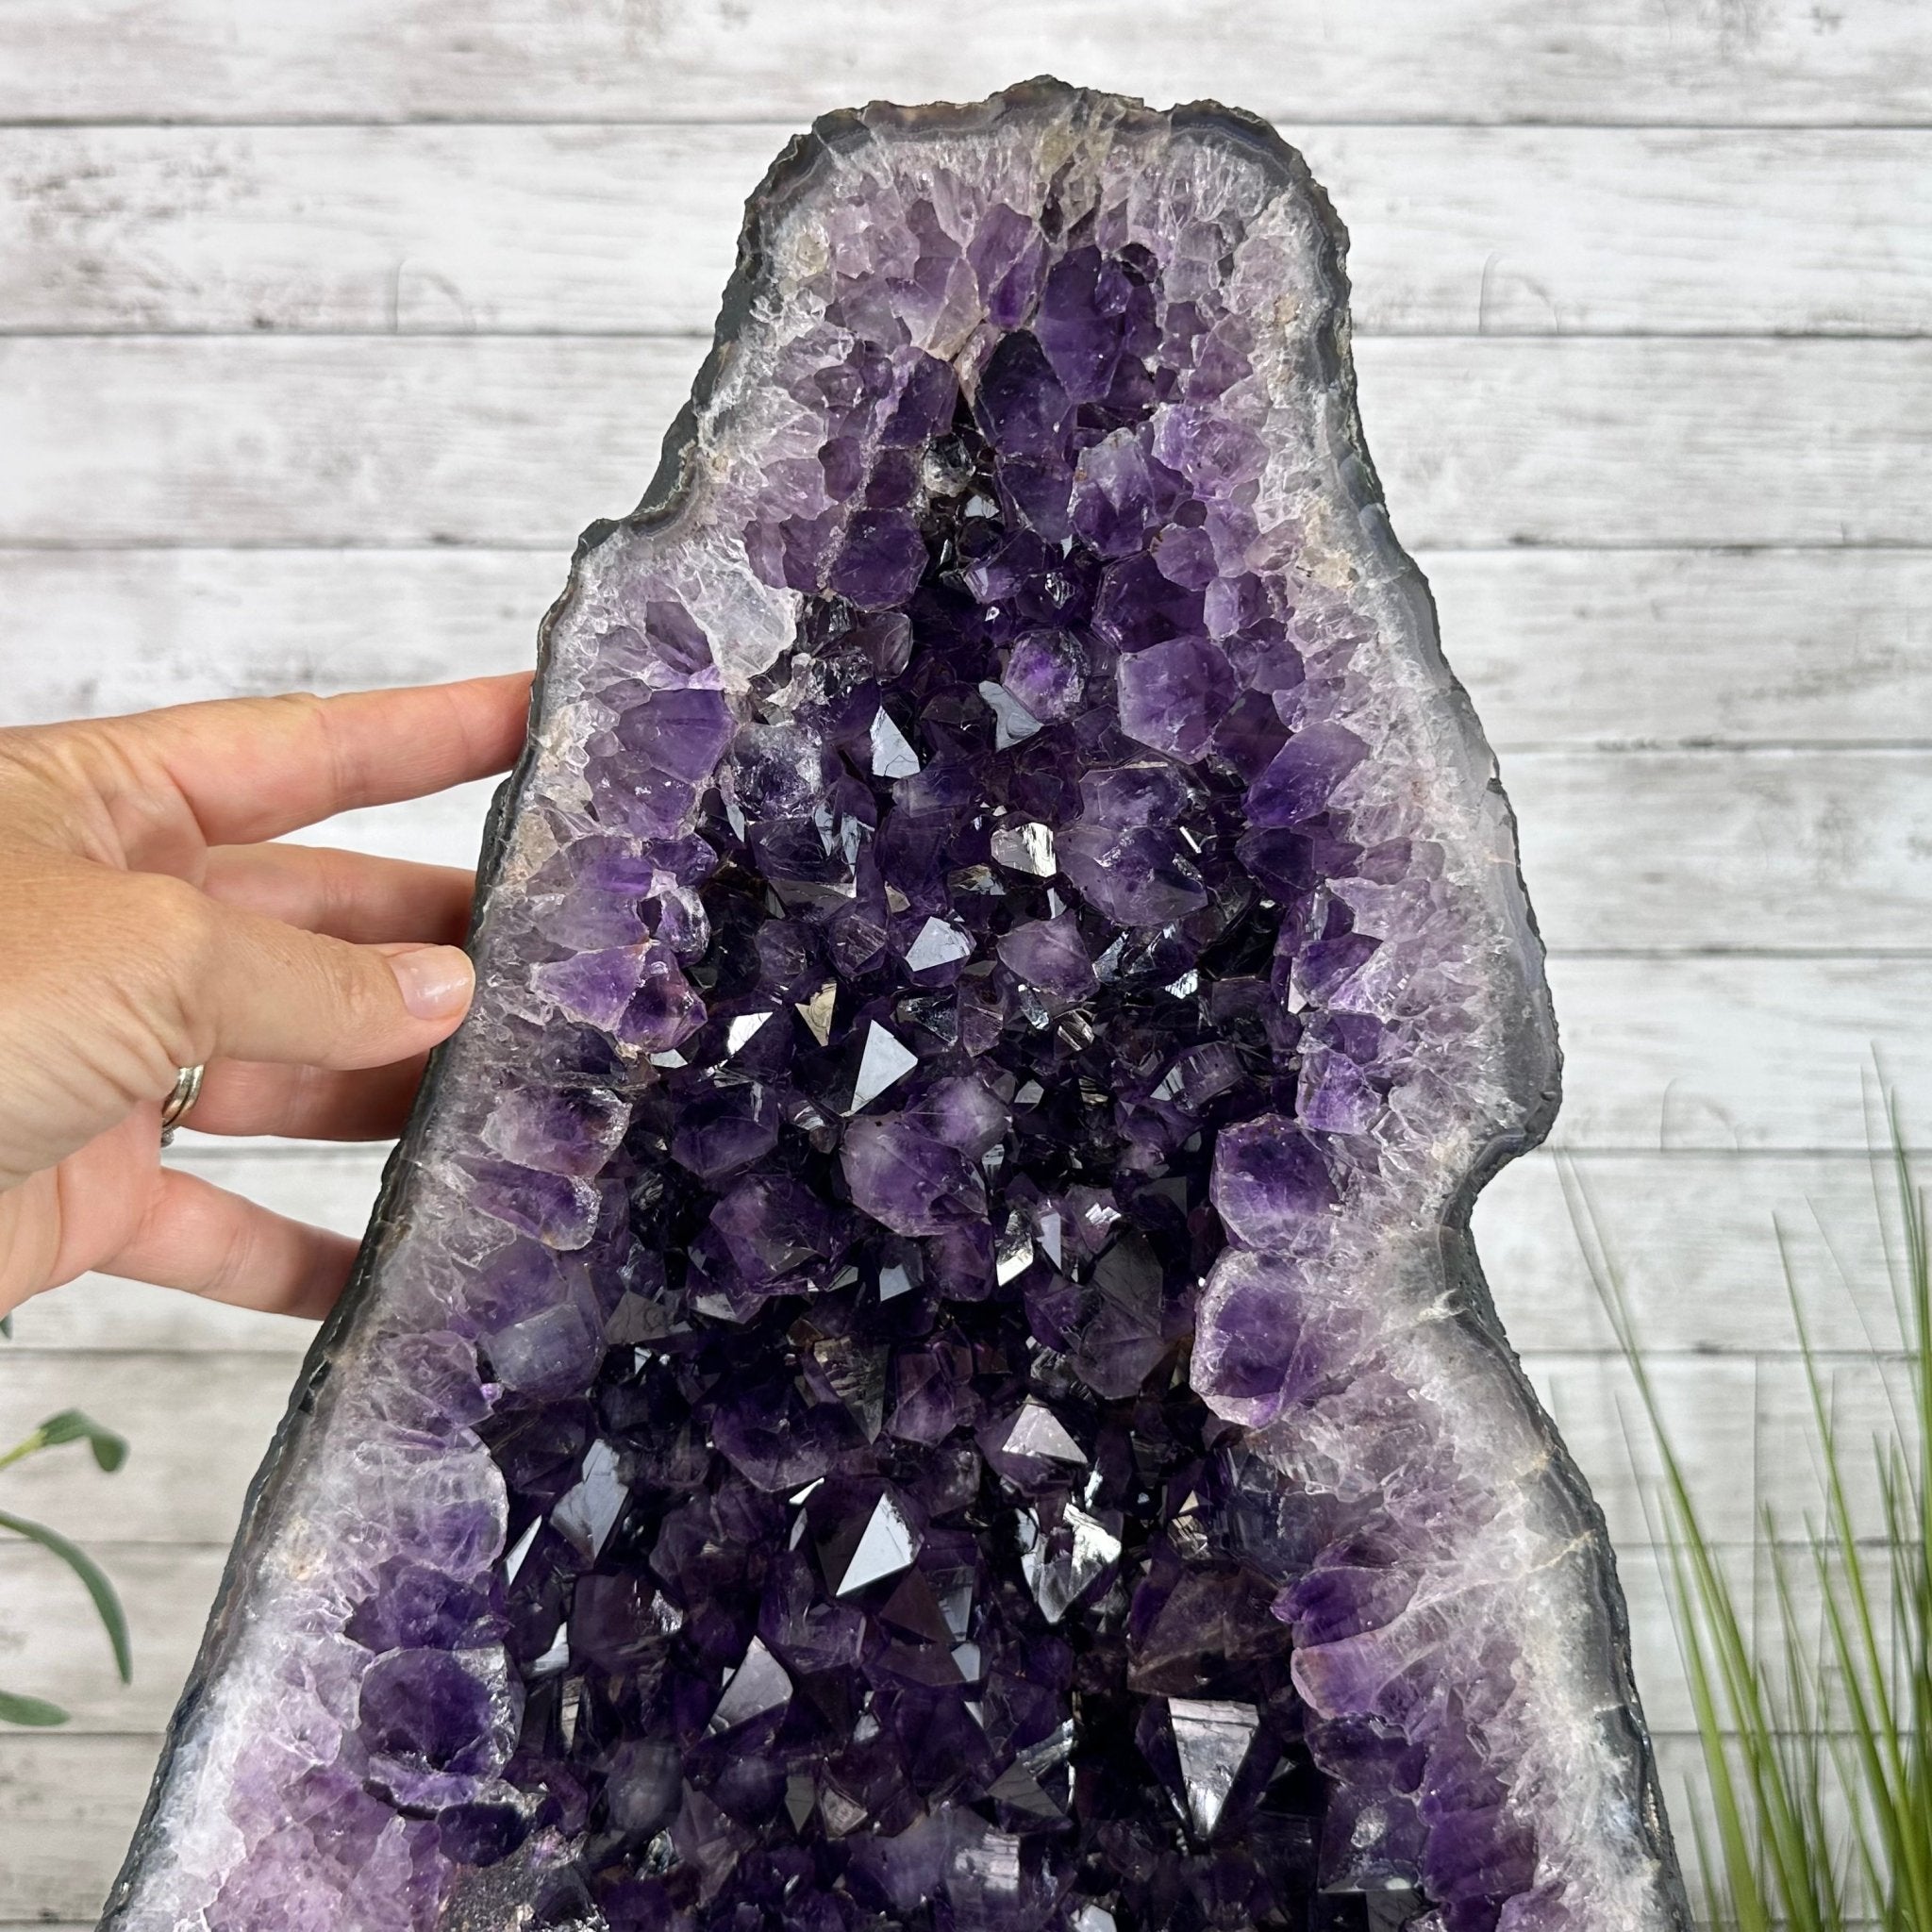 Extra Plus Quality Brazilian Amethyst Cathedral, 74.4 lbs & 21" Tall, Model #5601-0885 by Brazil Gems - Brazil GemsBrazil GemsExtra Plus Quality Brazilian Amethyst Cathedral, 74.4 lbs & 21" Tall, Model #5601-0885 by Brazil GemsCathedrals5601-0885